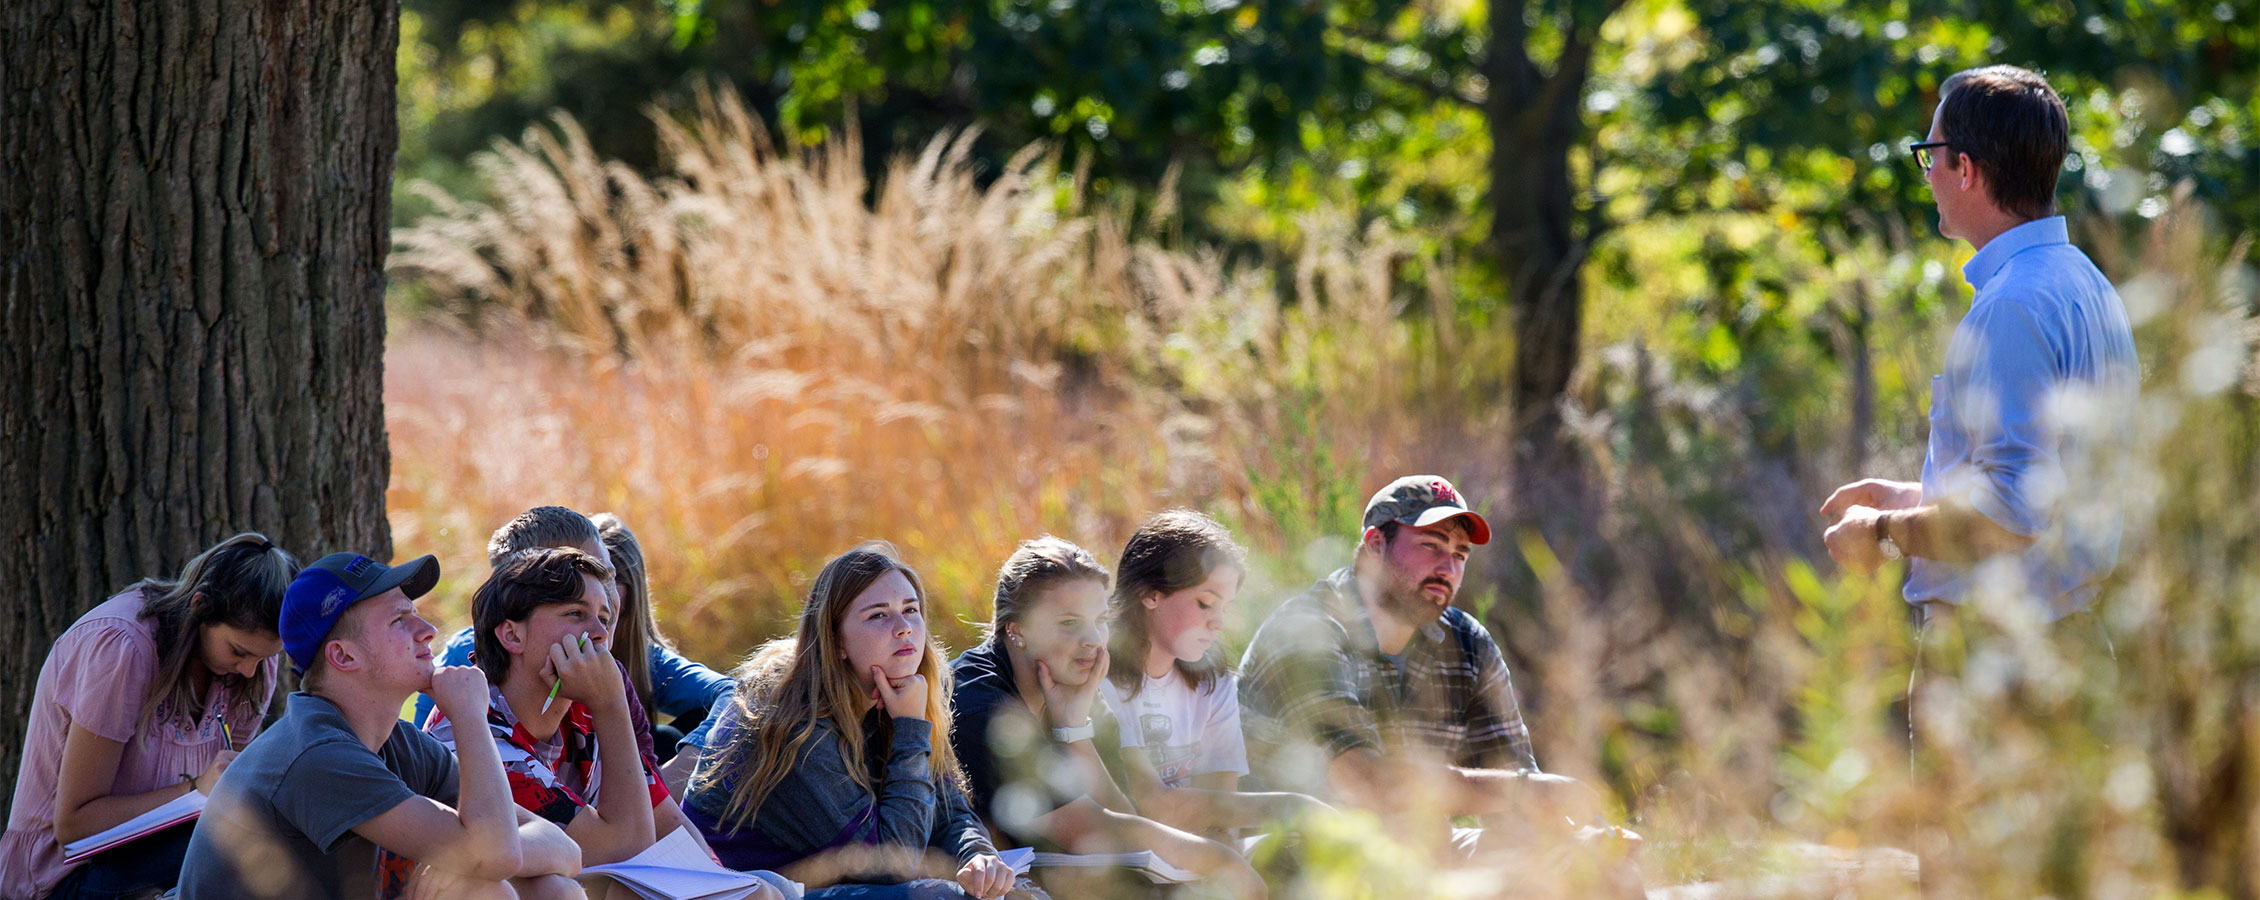 Students enjoy class learning outdoors at UW-Whitewater